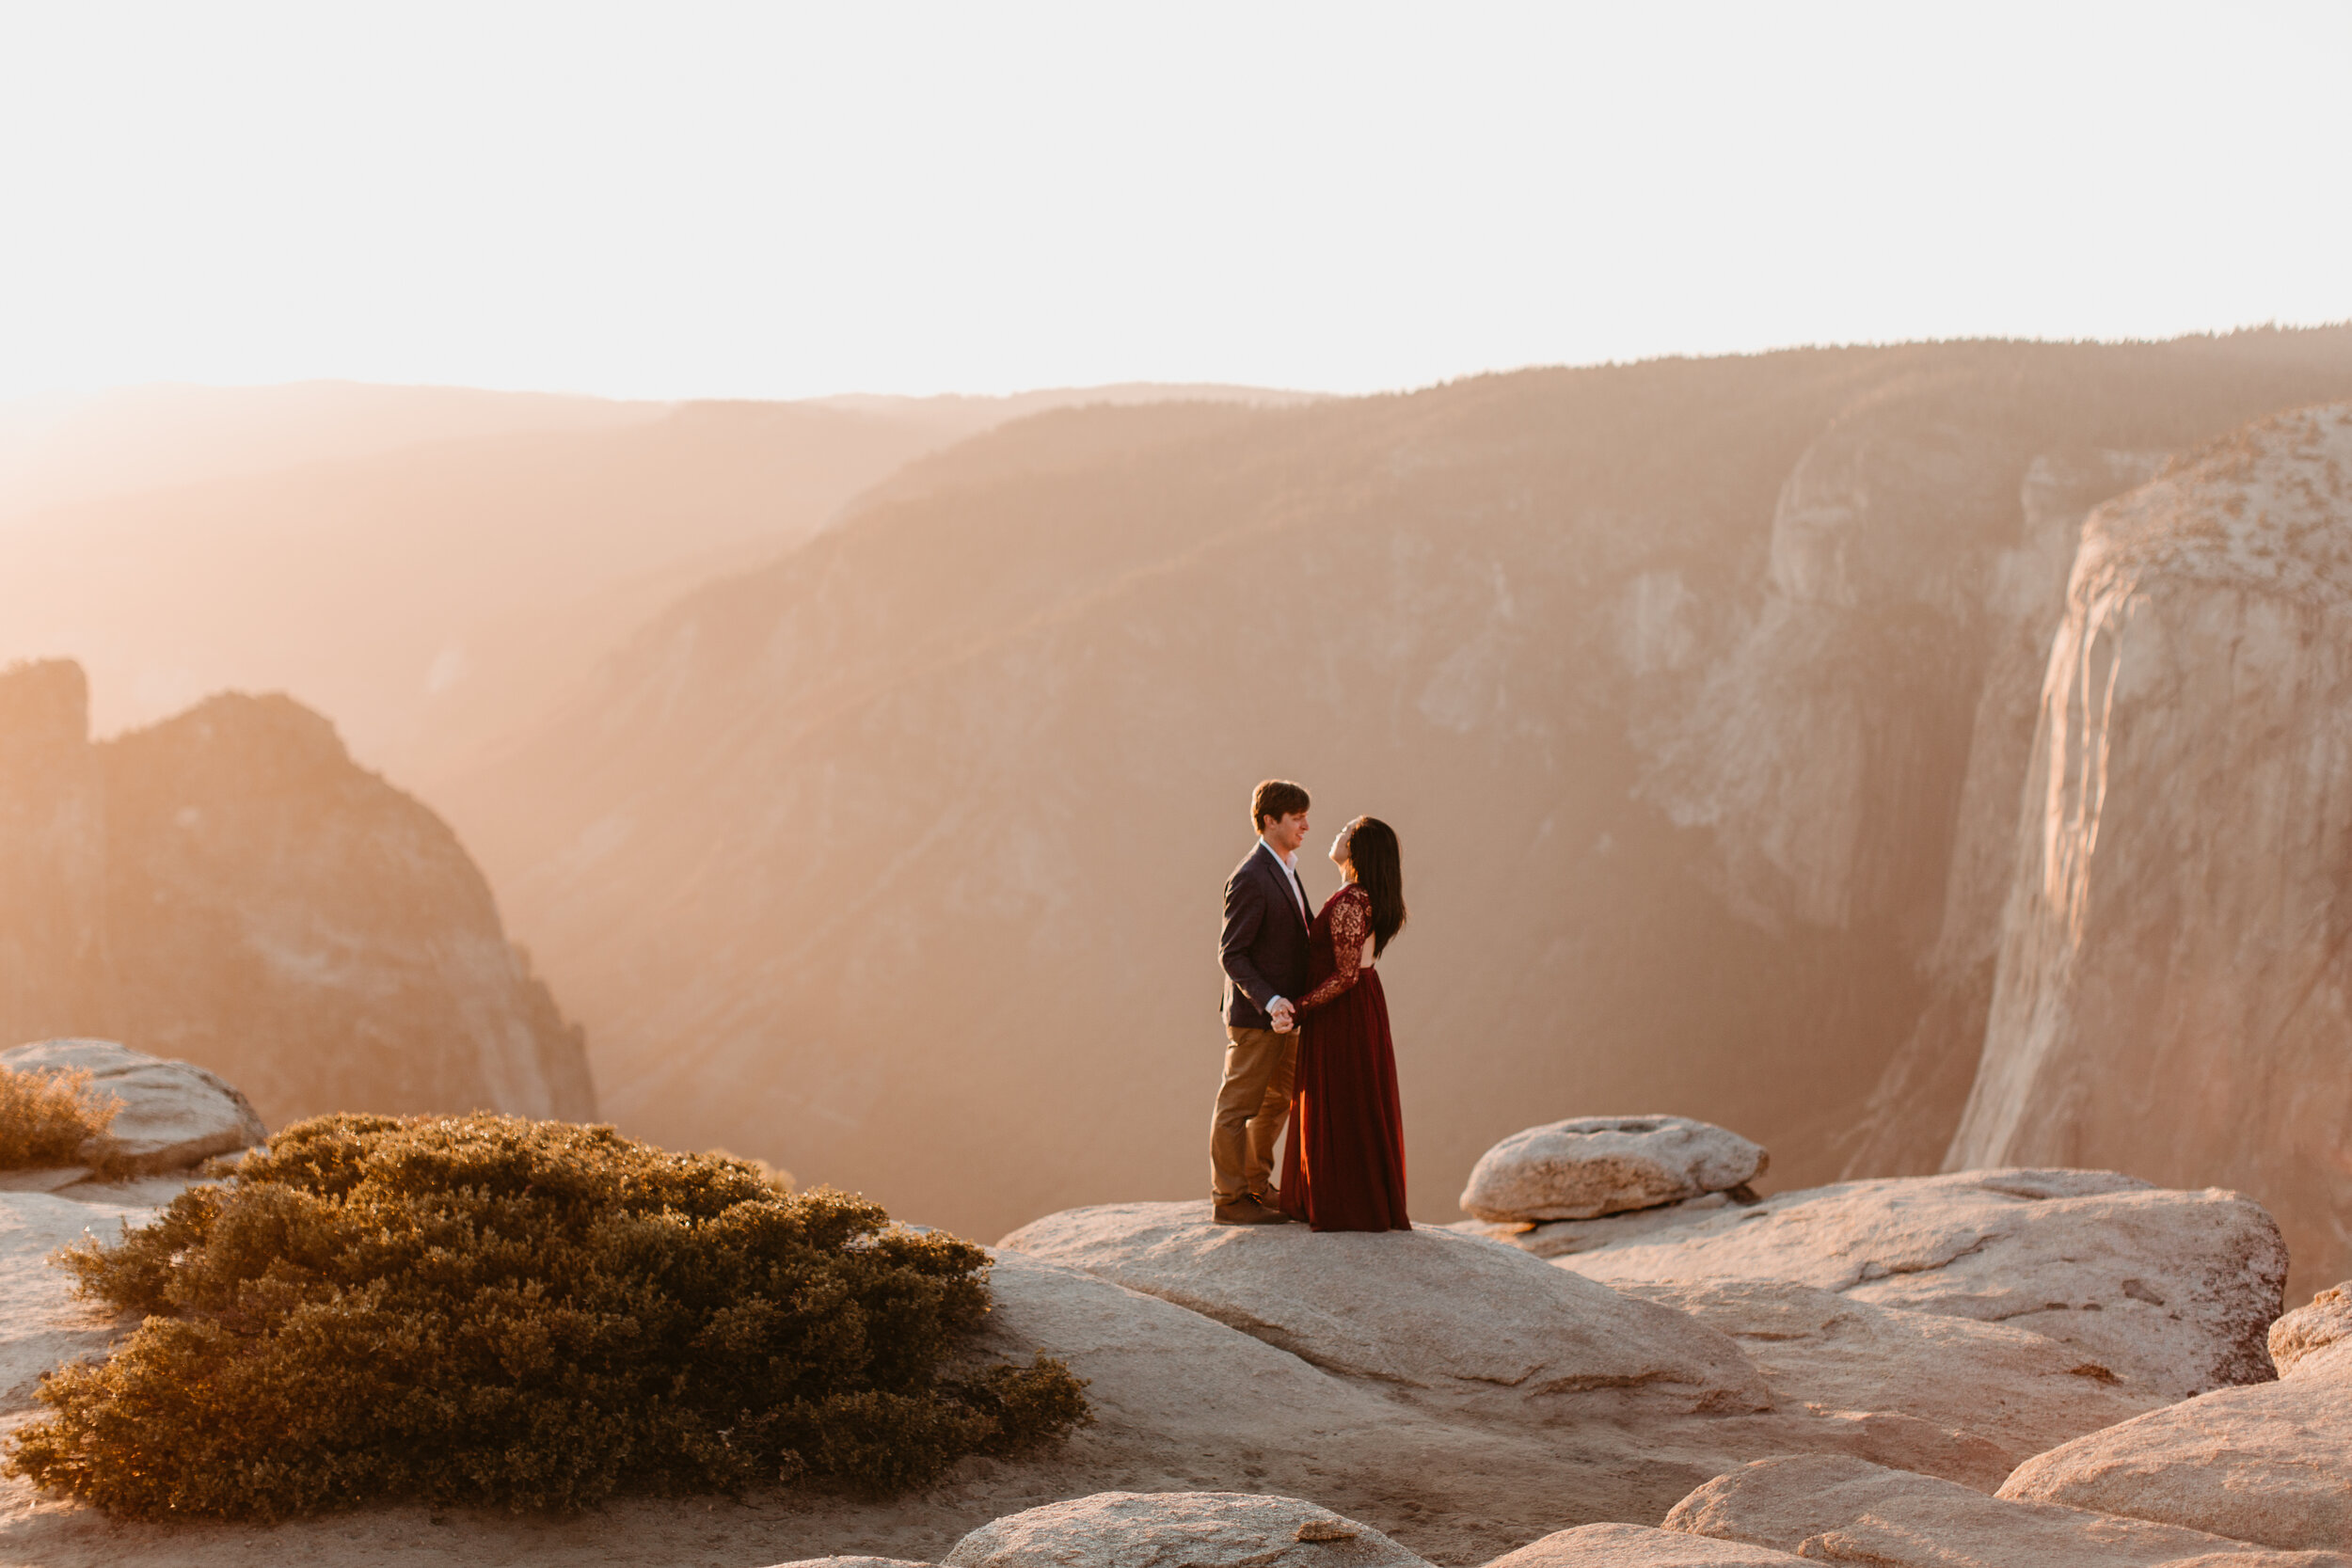 yosemite-national-park-couples-session-at-taft-point-and-yosemite-valley-yosemite-elopement-photographer-nicole-daacke-photography-147.jpg